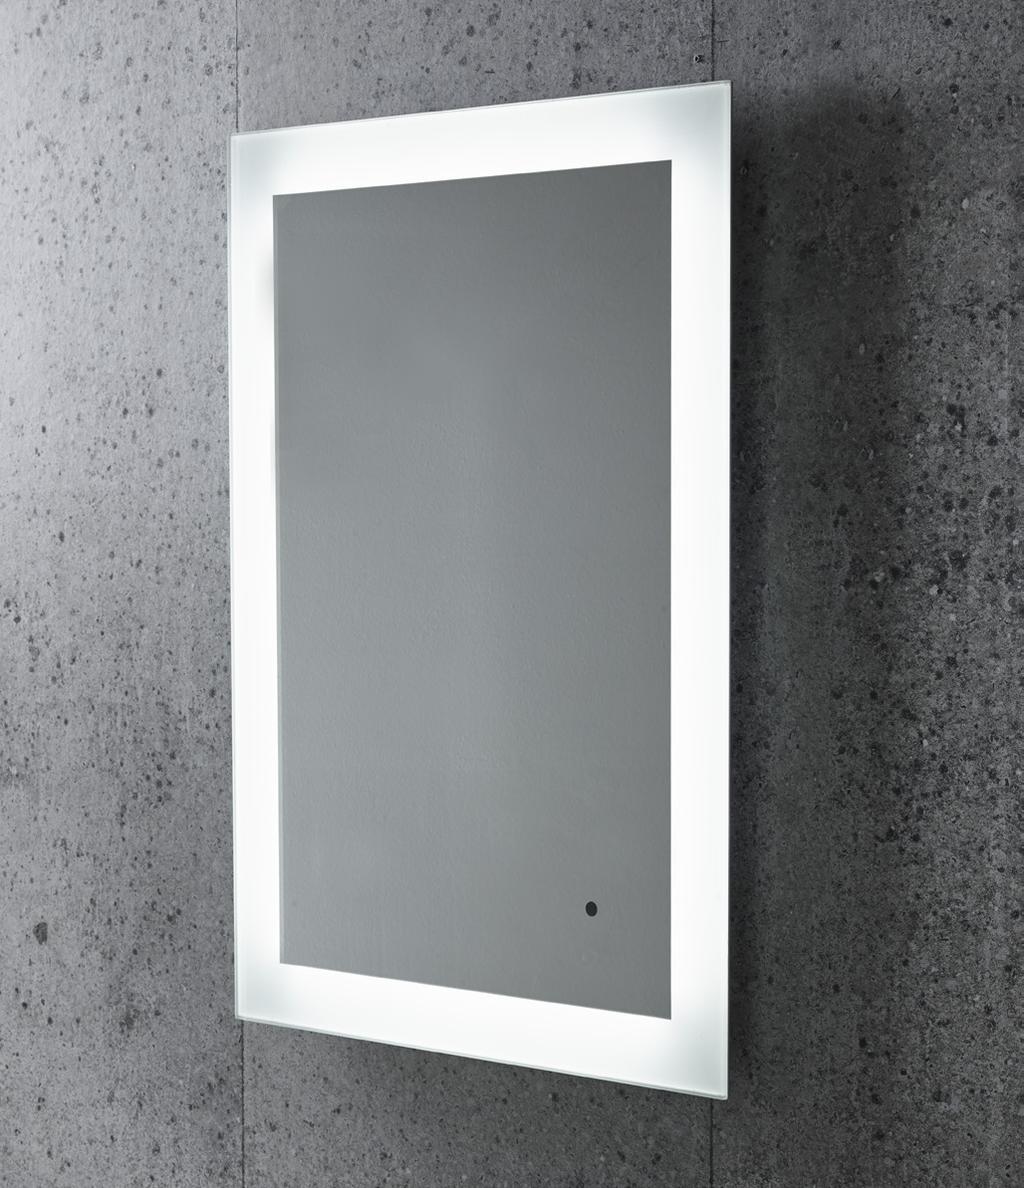 700(h) x 30(d)mm Features: Energy efficient LED lighting, Heated demister pad, Infrared sensor, Slim tapered